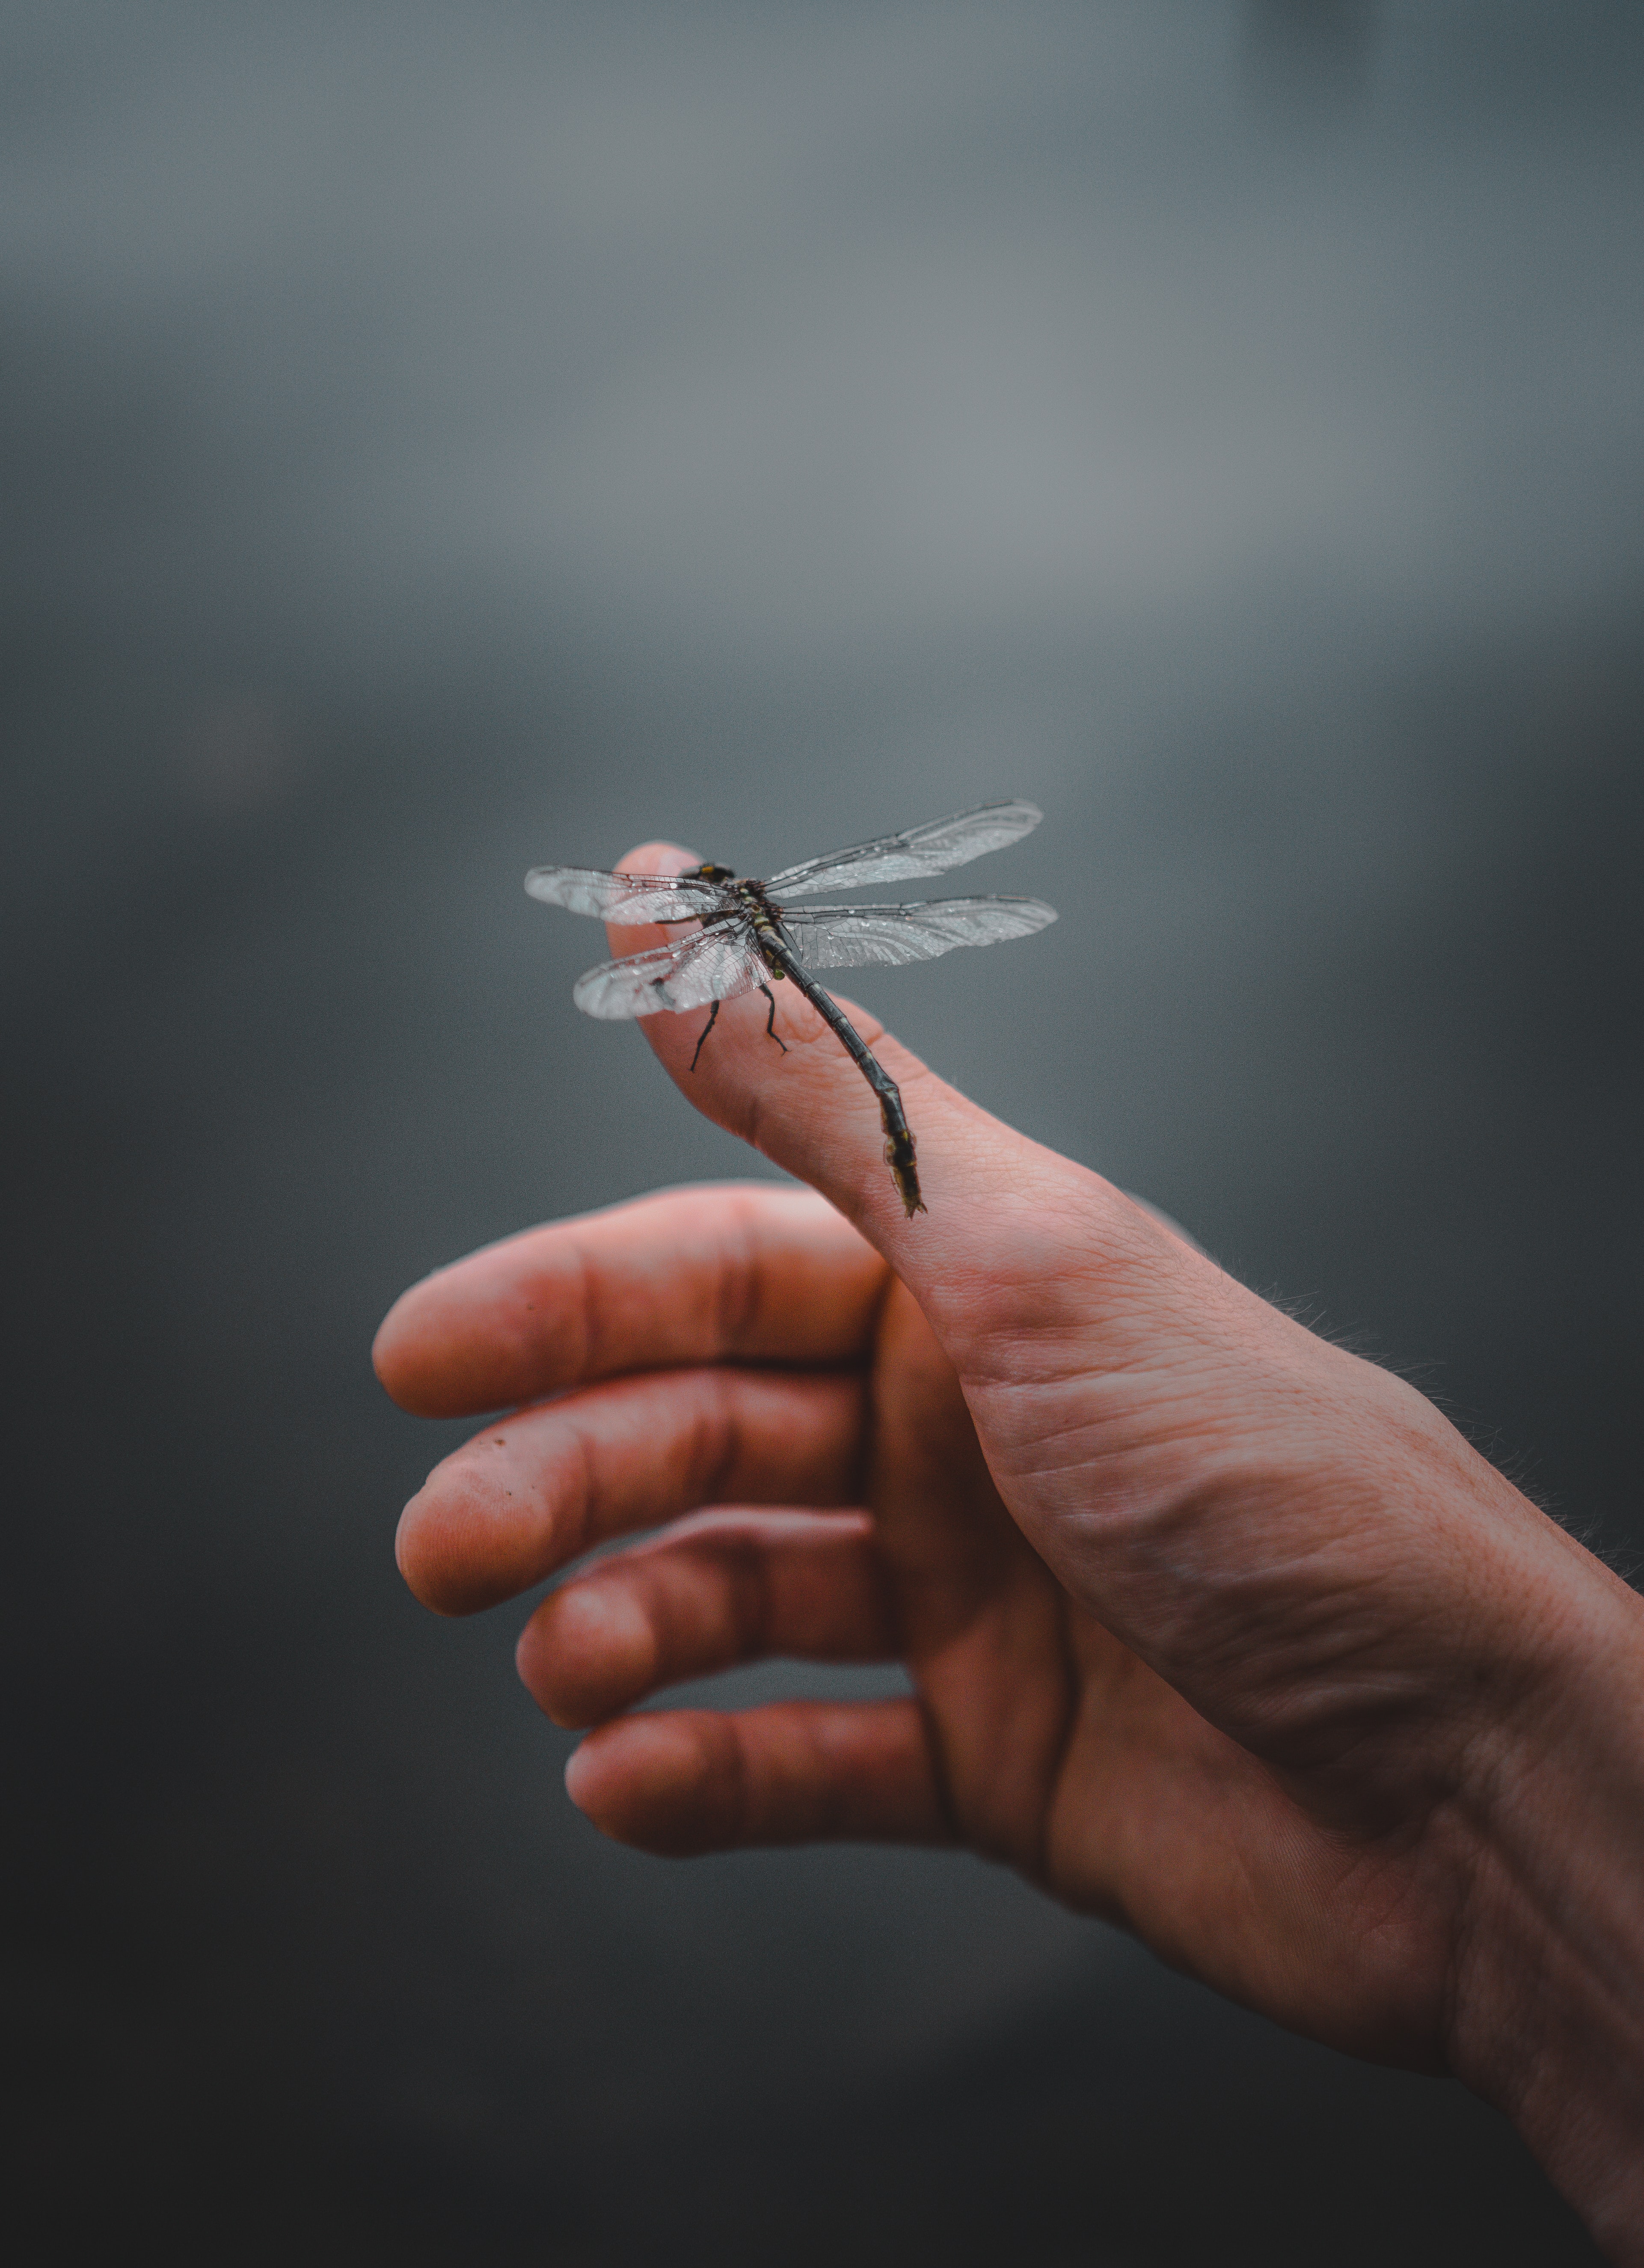 dragonfly, fingers, hand, miscellanea, miscellaneous, insect